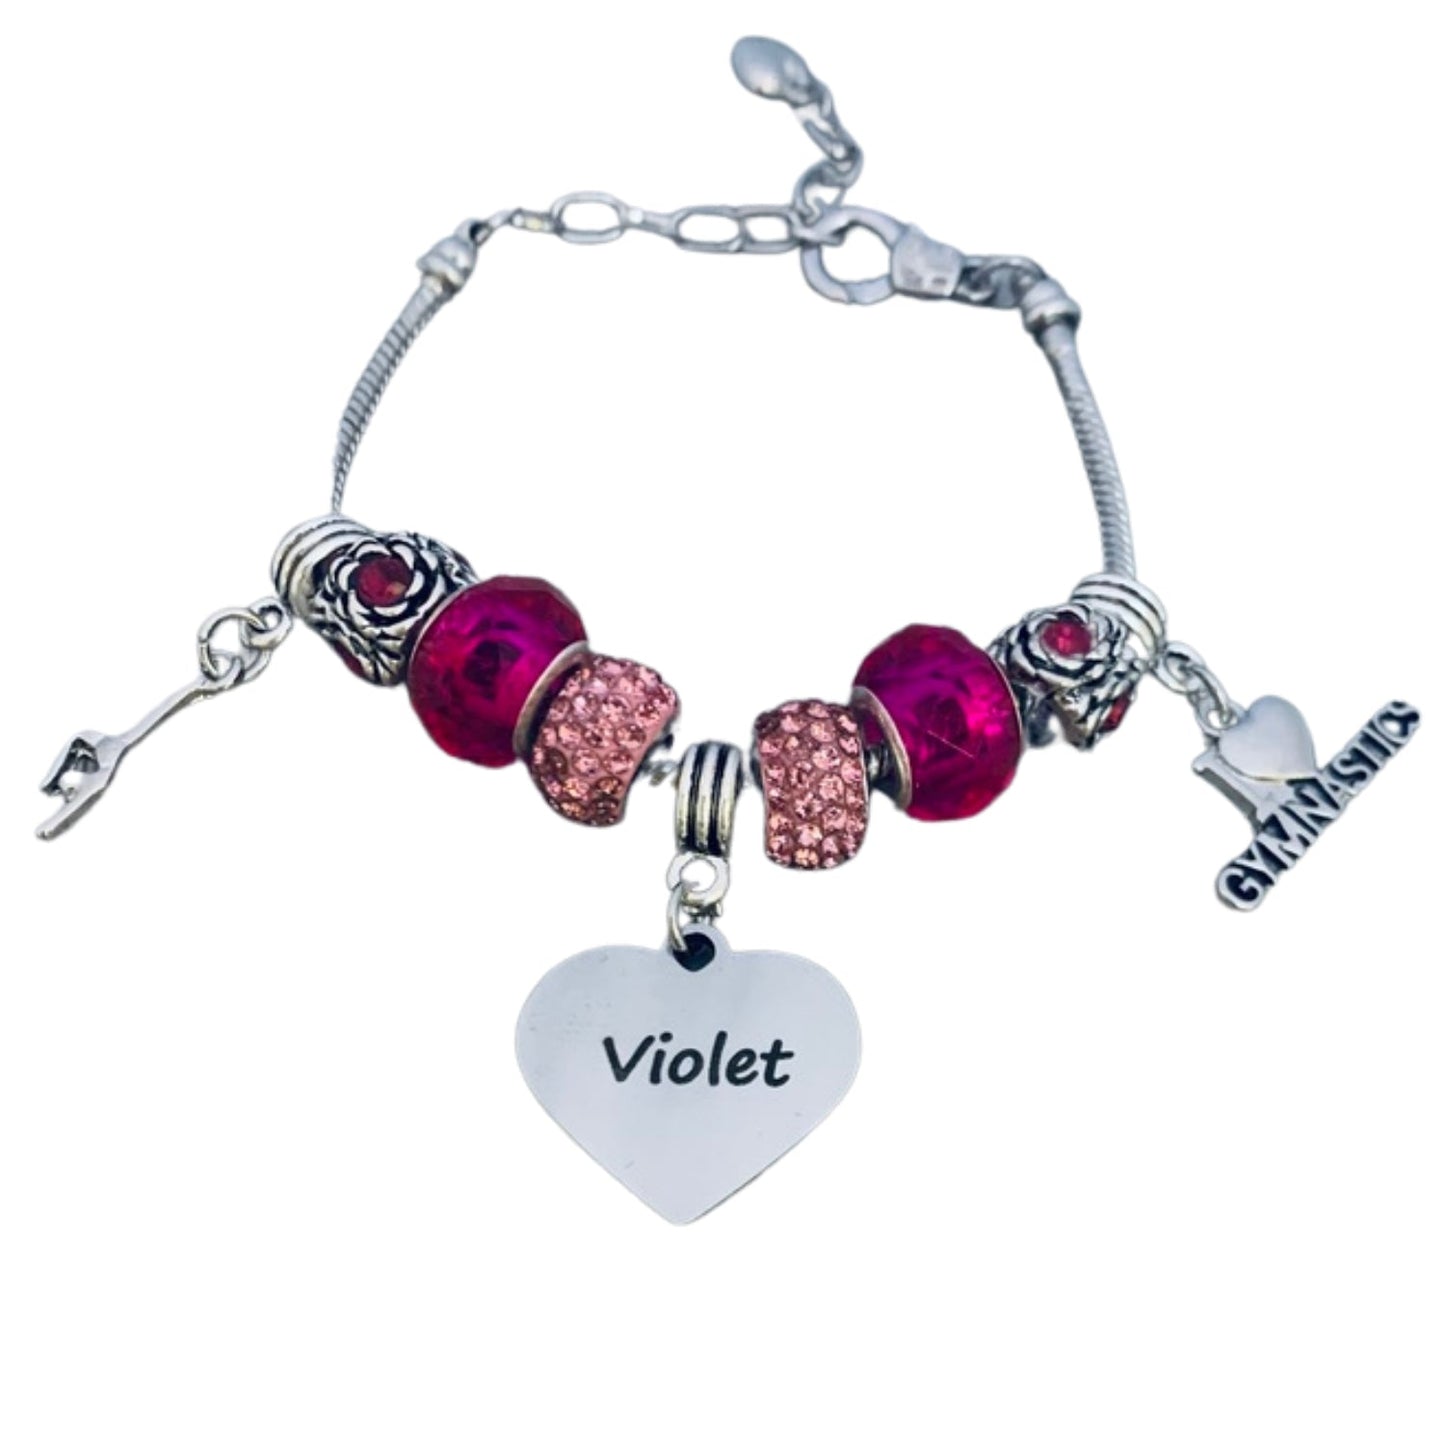 Girls Personalized Silver Plated Adjustable Gymnastics Bracelet with Engraved Charm